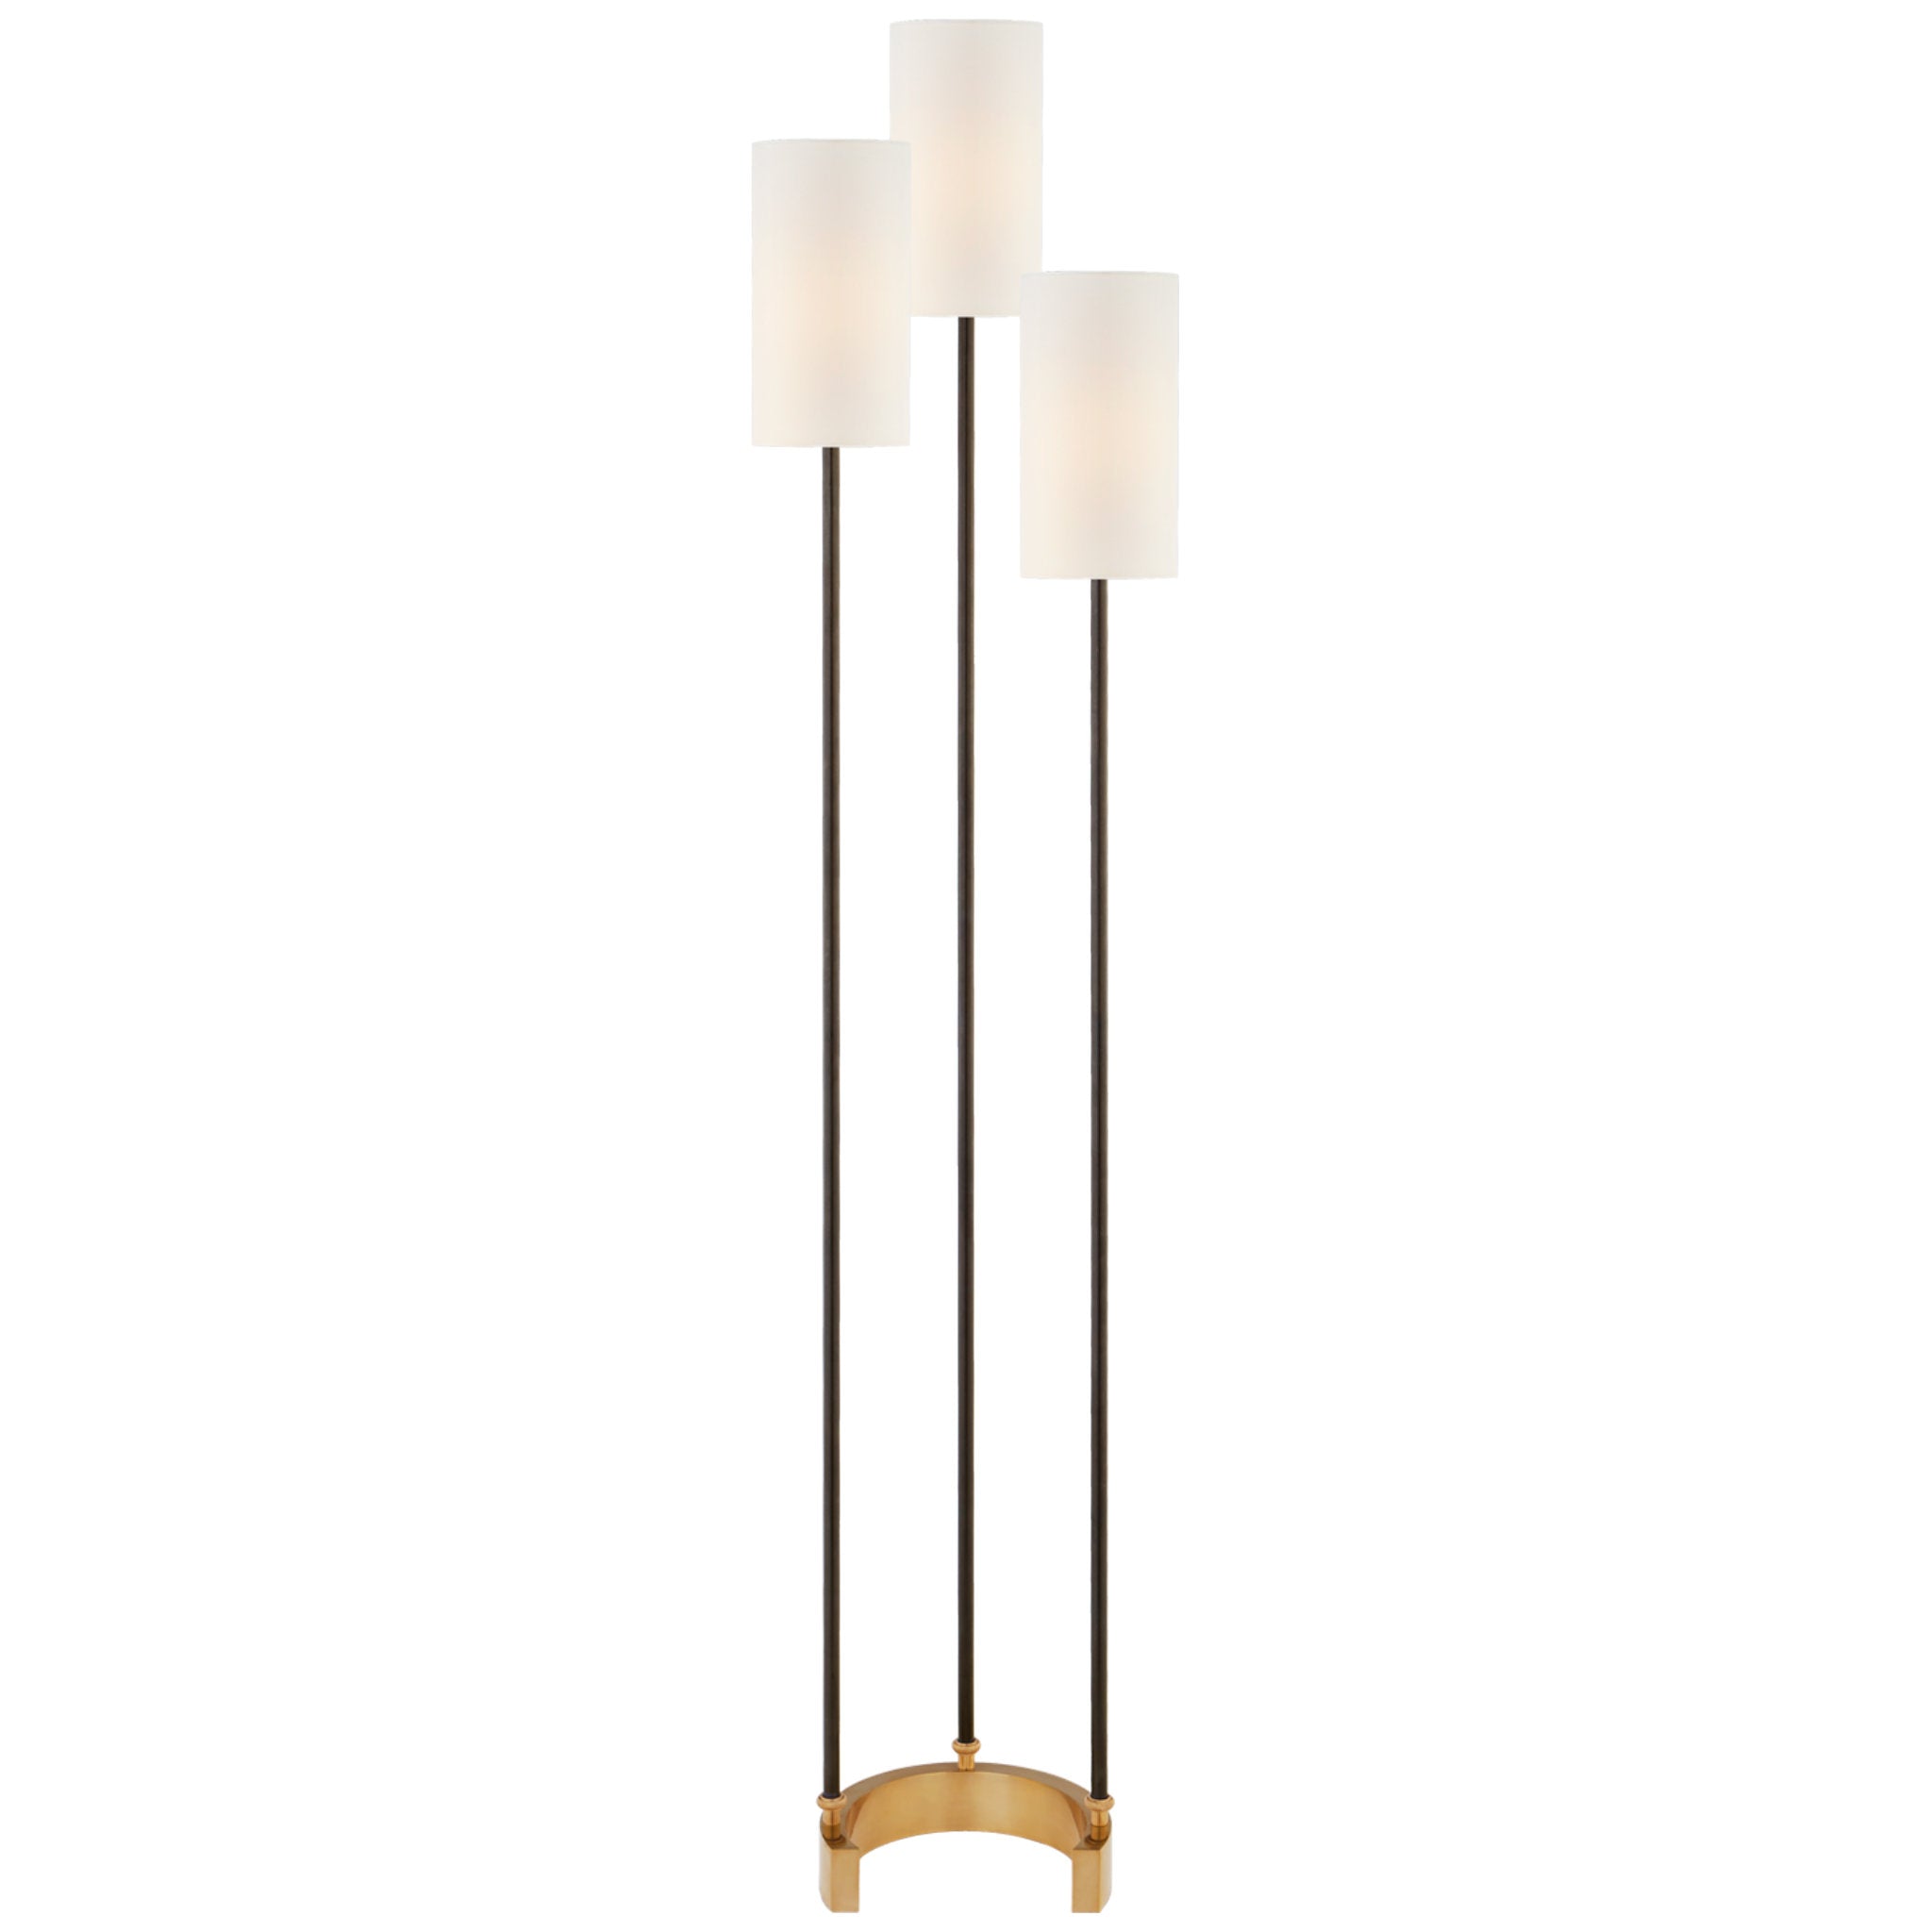 Suzanne Kasler Aimee Floor Lamp in Bronze and Hand-Rubbed Antique Brass with Linen Shades